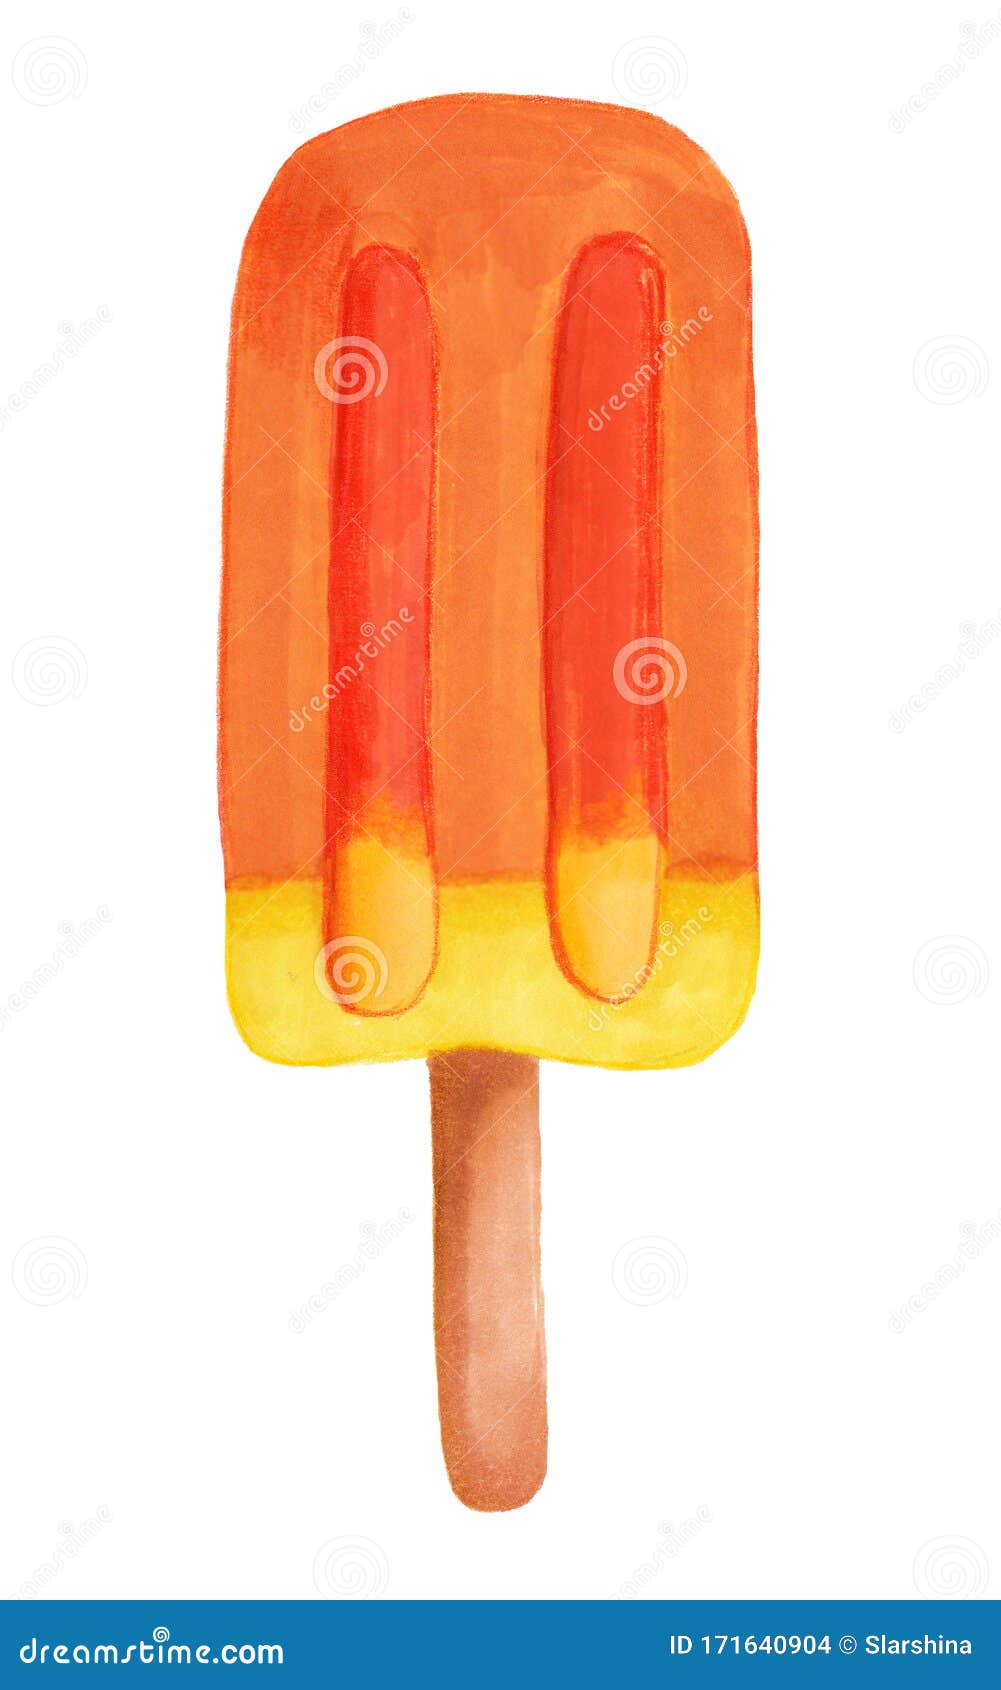 Tasty Colored Fruit Ice on a Stick Isolated on White Background. Hand Drawn  Realistic Ice Cream Illustration Stock Photo - Image of chocolate, icon:  171640904